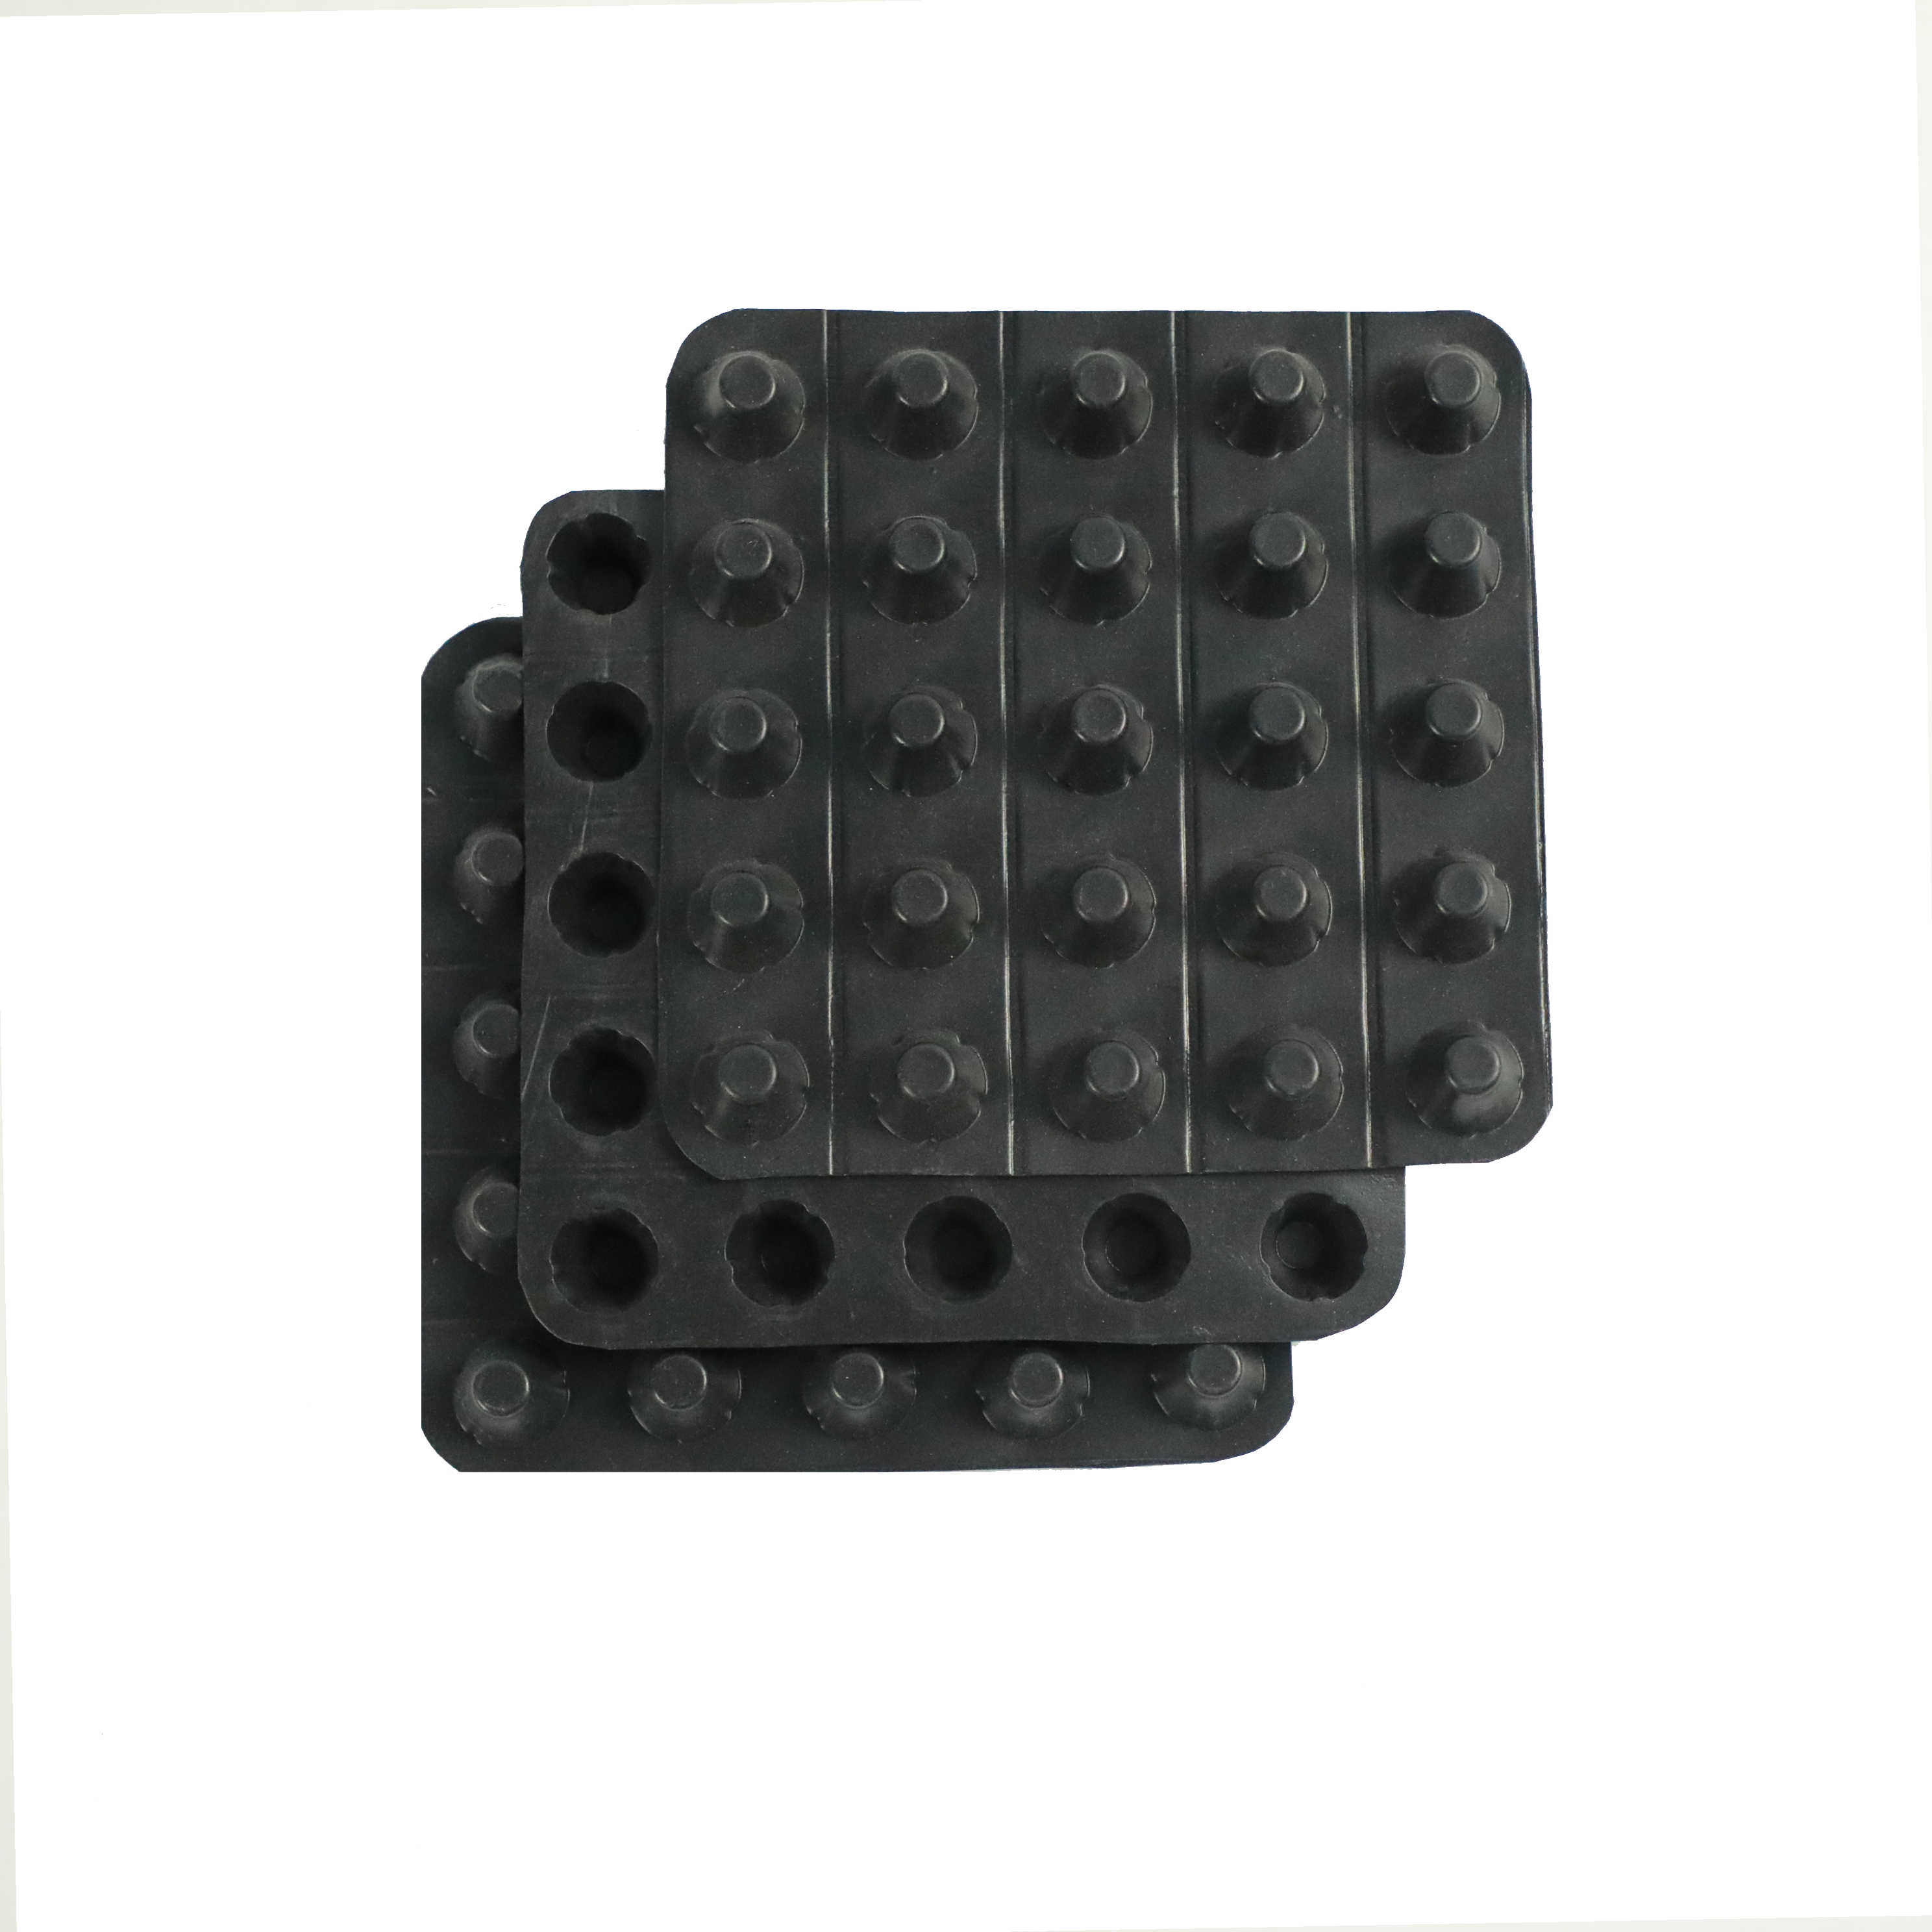 waterproofing 8mm plastic dimple drainage board dimple drain board for roof garden